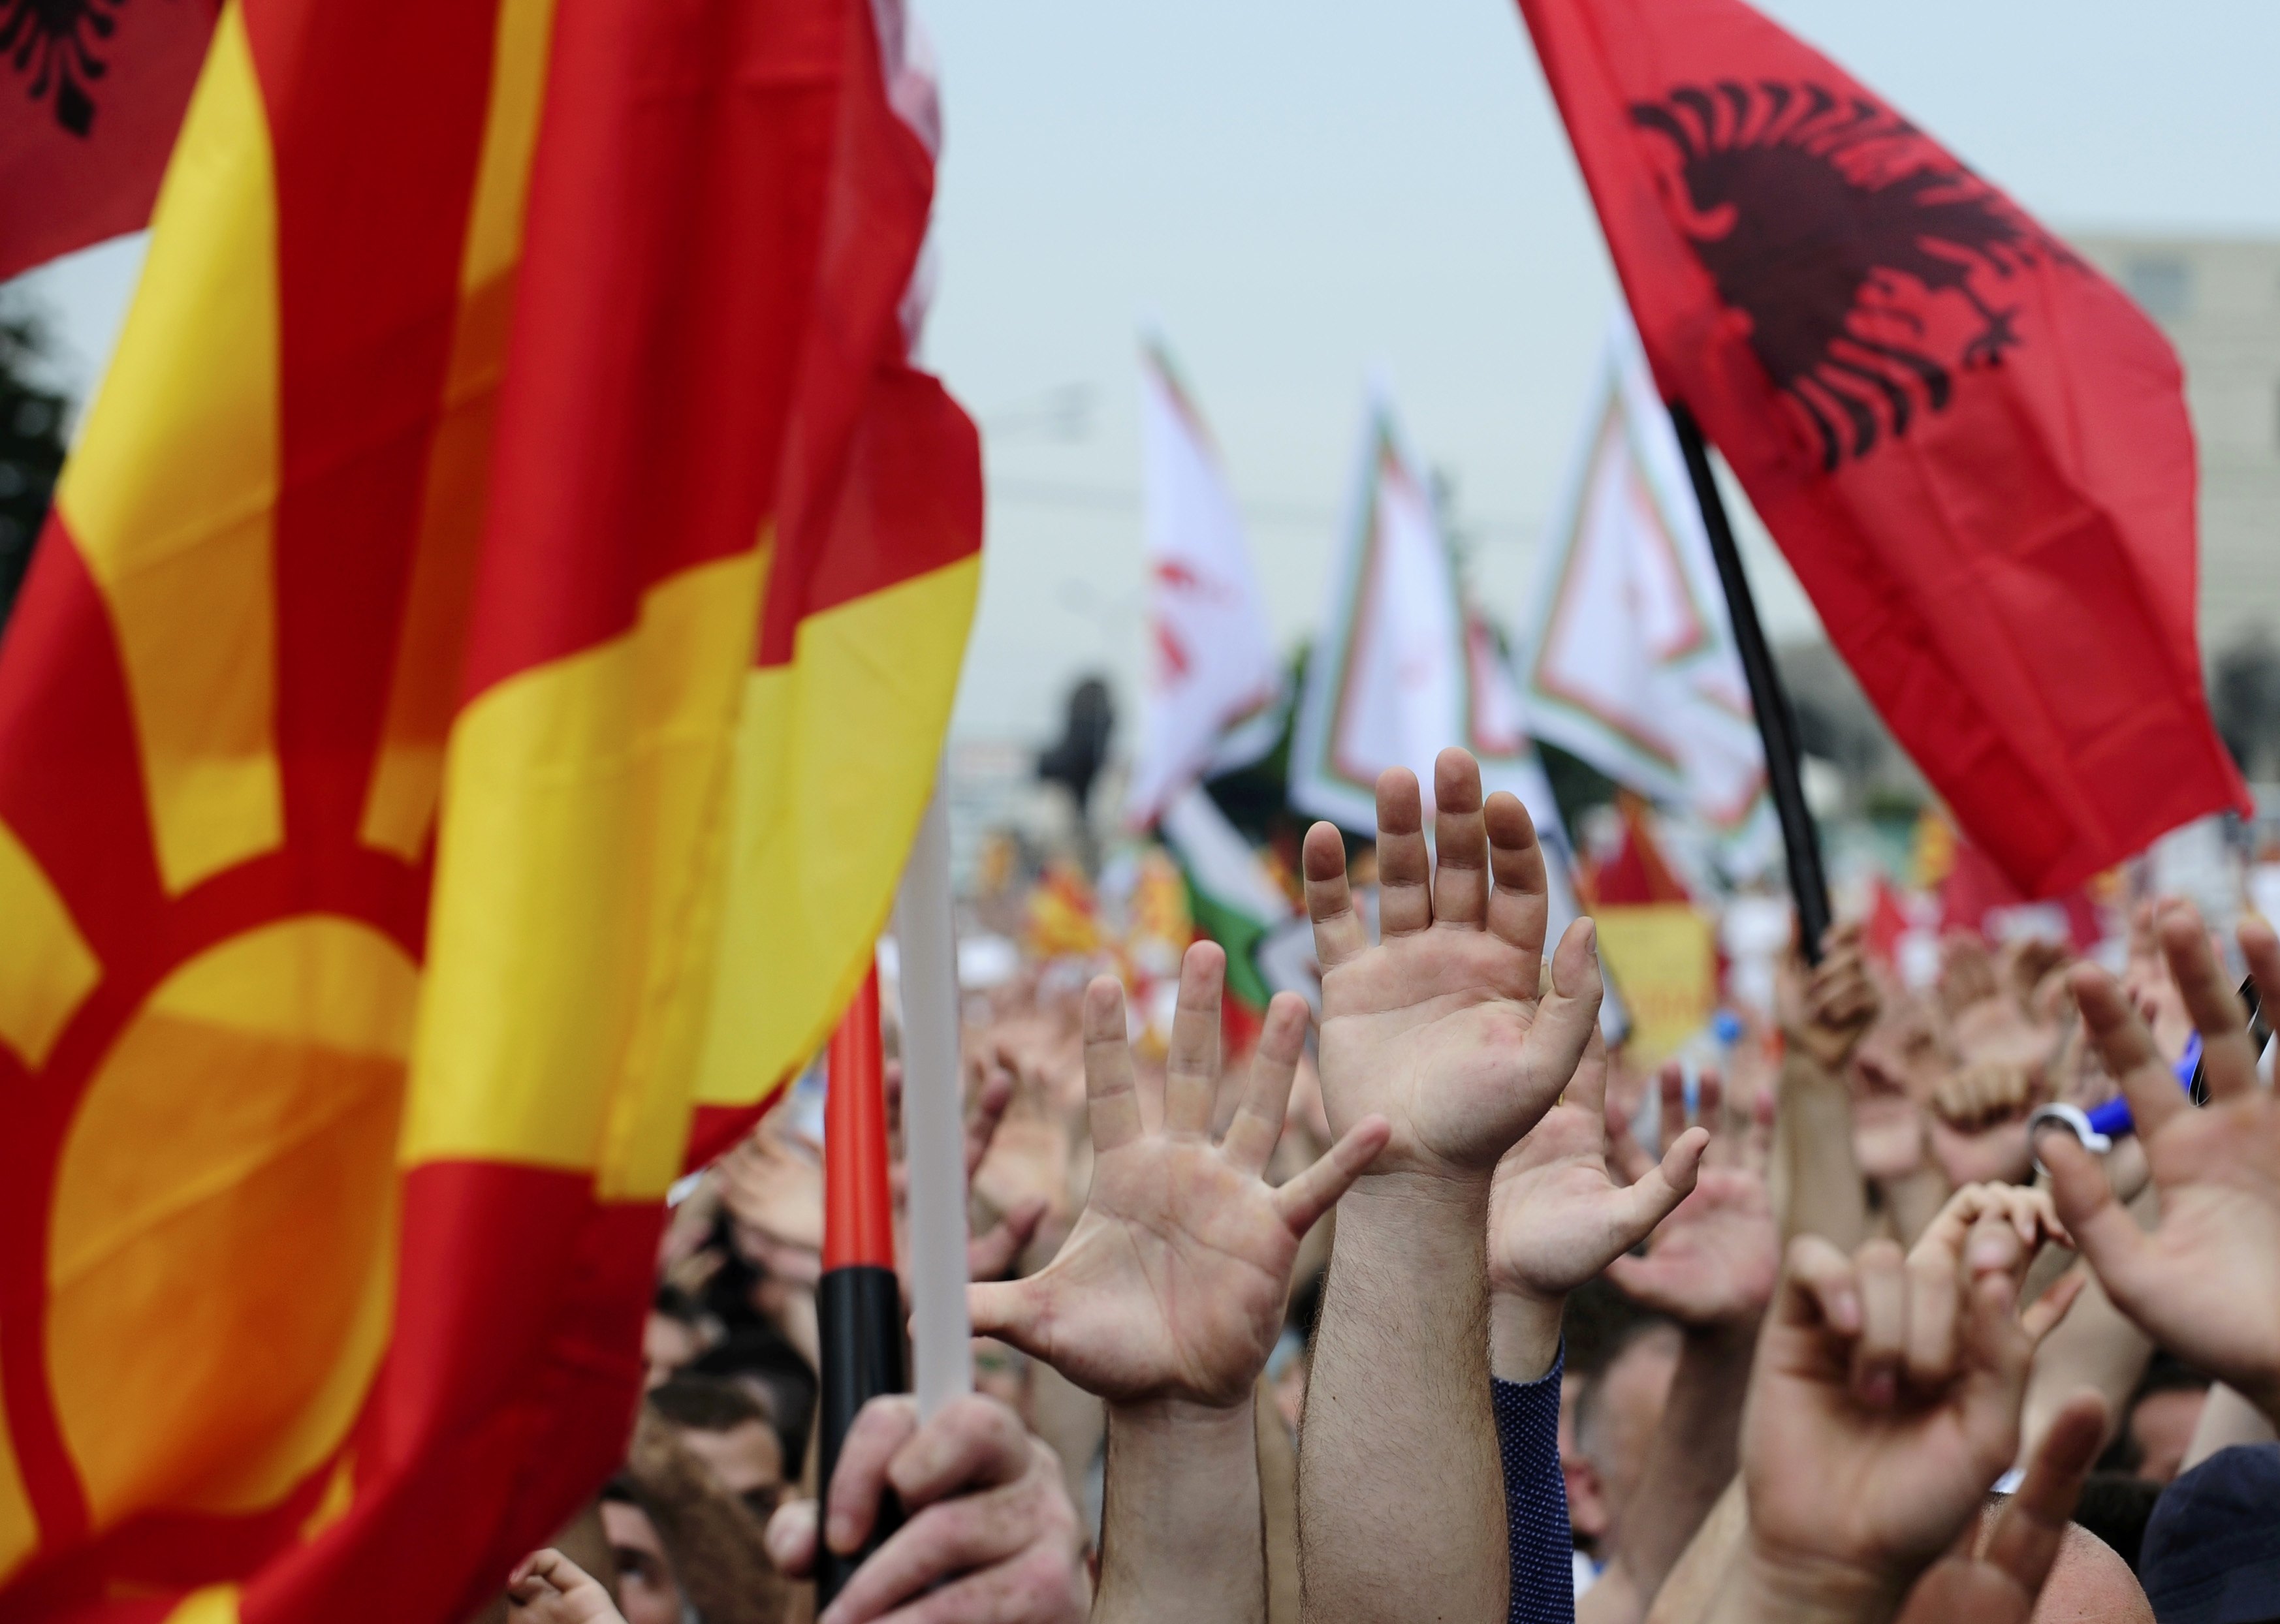 Protesters waving Macedonian and Albanian flags raise their hands during an anti-government demonstration in Skopje, Macedonia, May 17, 2015. Tens of thousands of protesters took to the streets of Macedonia's capital on Sunday, waving Macedonian and Albanian flags in a dramatic display of ethnic unity against a government on the ropes after months of damaging wire-tap revelations. REUTERS/Ognen Teofilovski